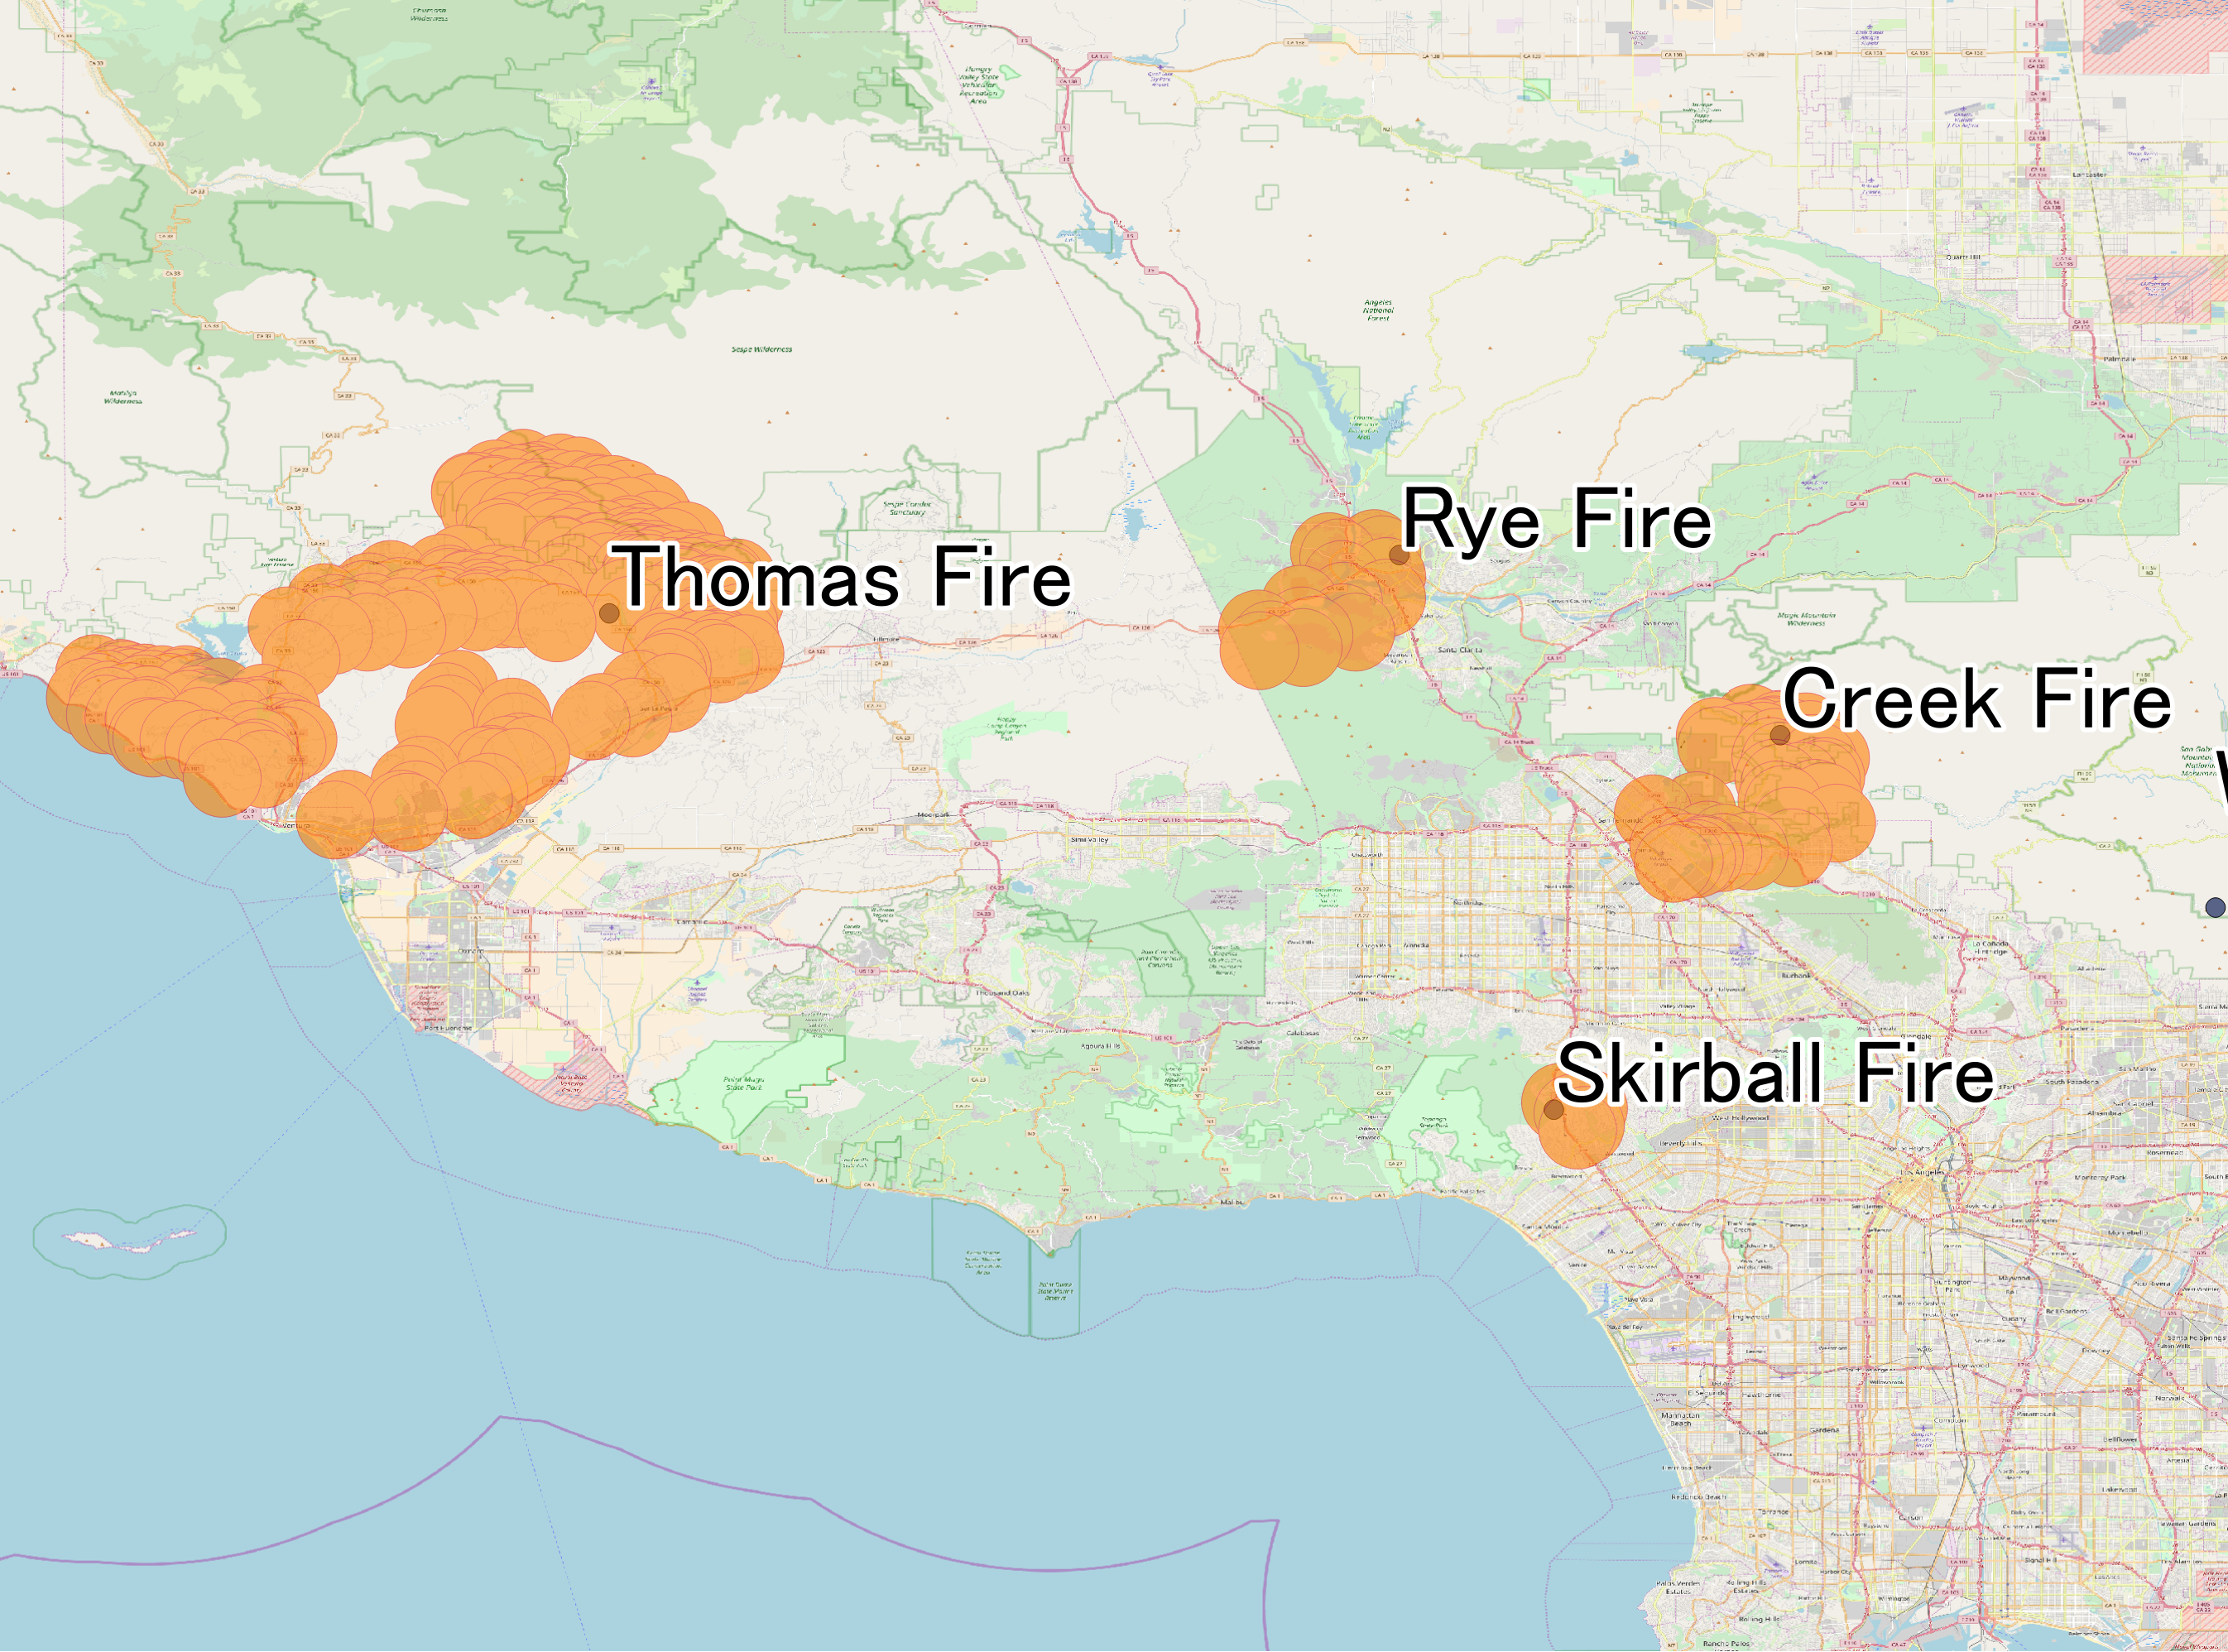 December 2017 Southern California Wildfires - Wikipedia - Fires In California 2017 Map